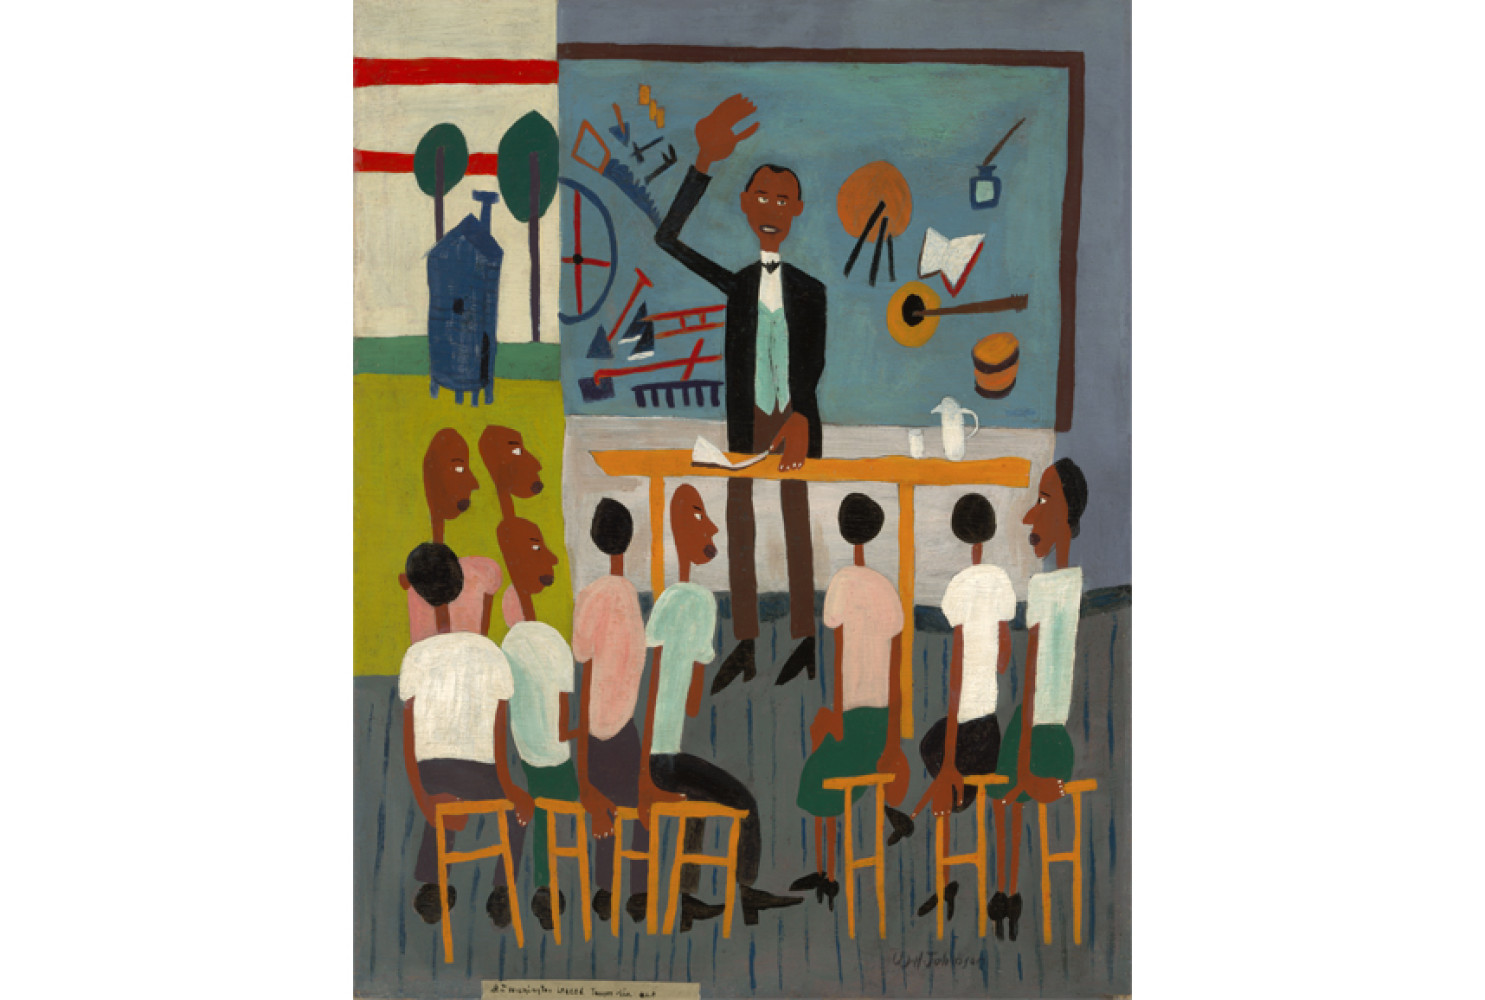 Booker T. Washington Legend, ca. 1944-1945, by William H. Johnson (American, 1901-1970). Oil on plywood. 32 5/8 x 25 1/4 inches. Image courtesy of Smithsonian American Art Museum.